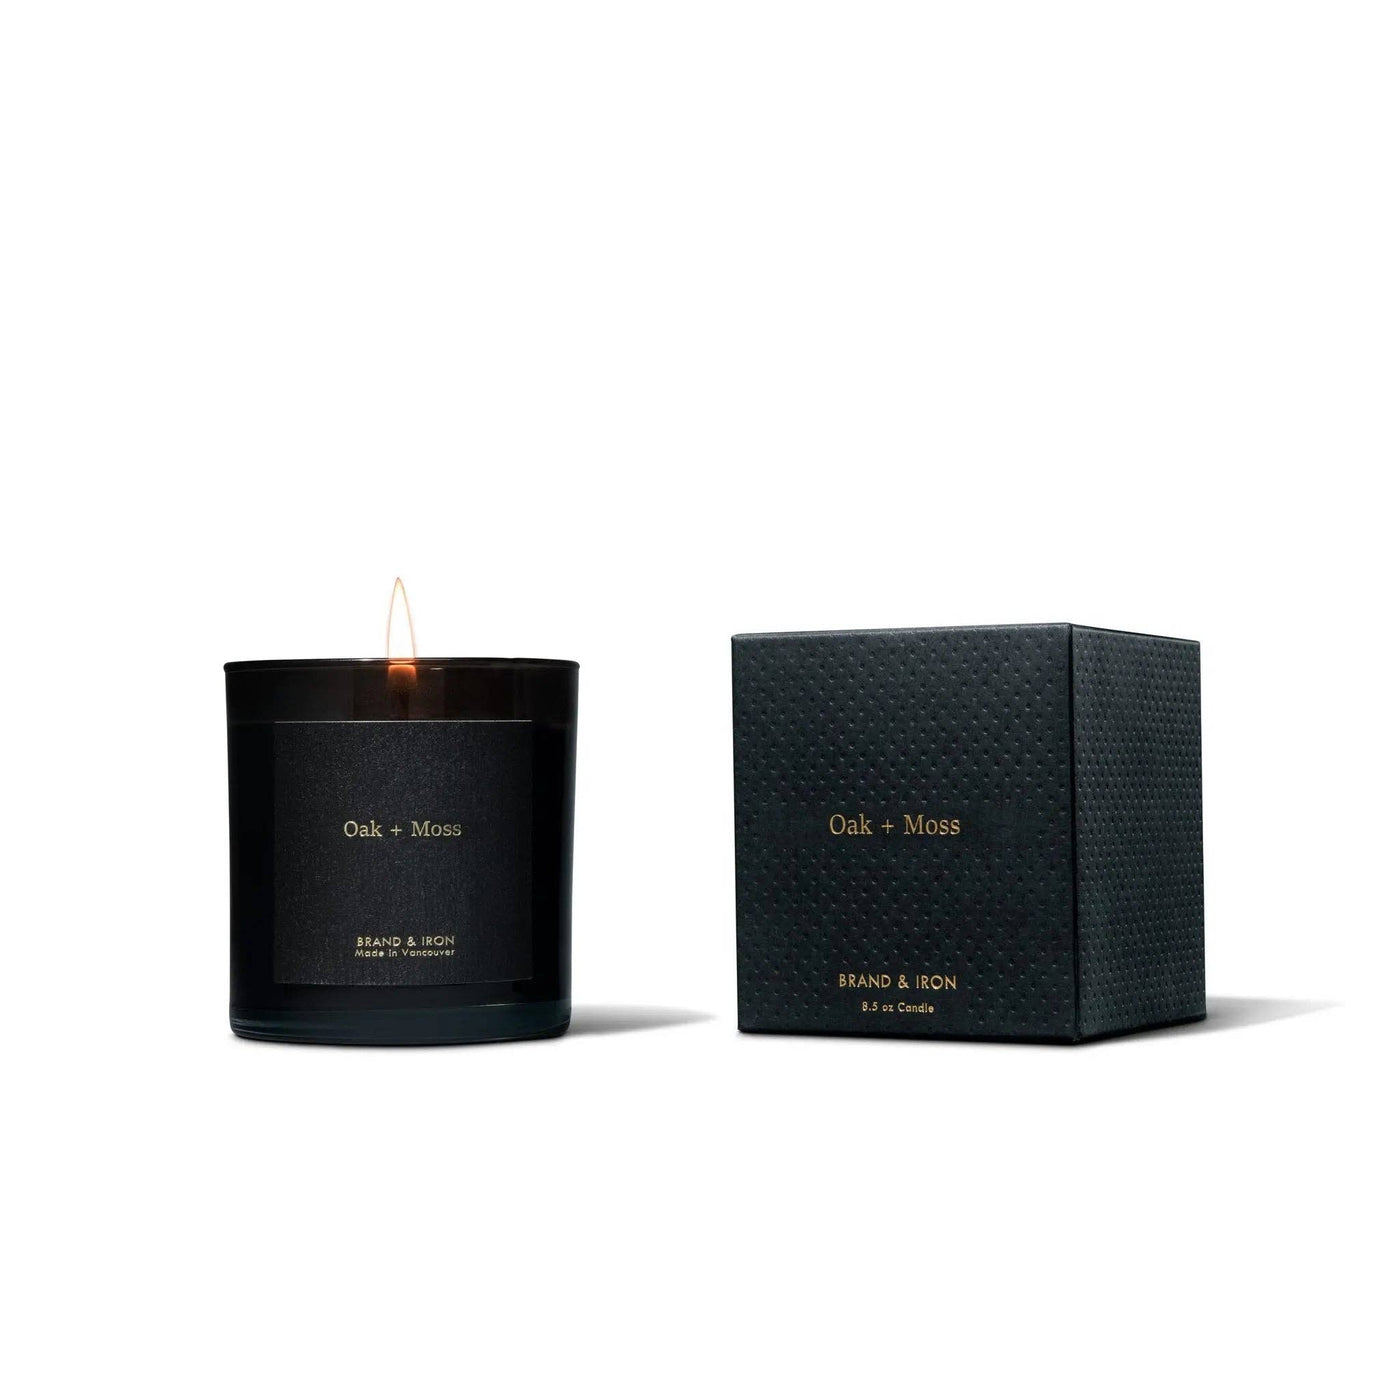 Oak + Moss Candle - The Local Space